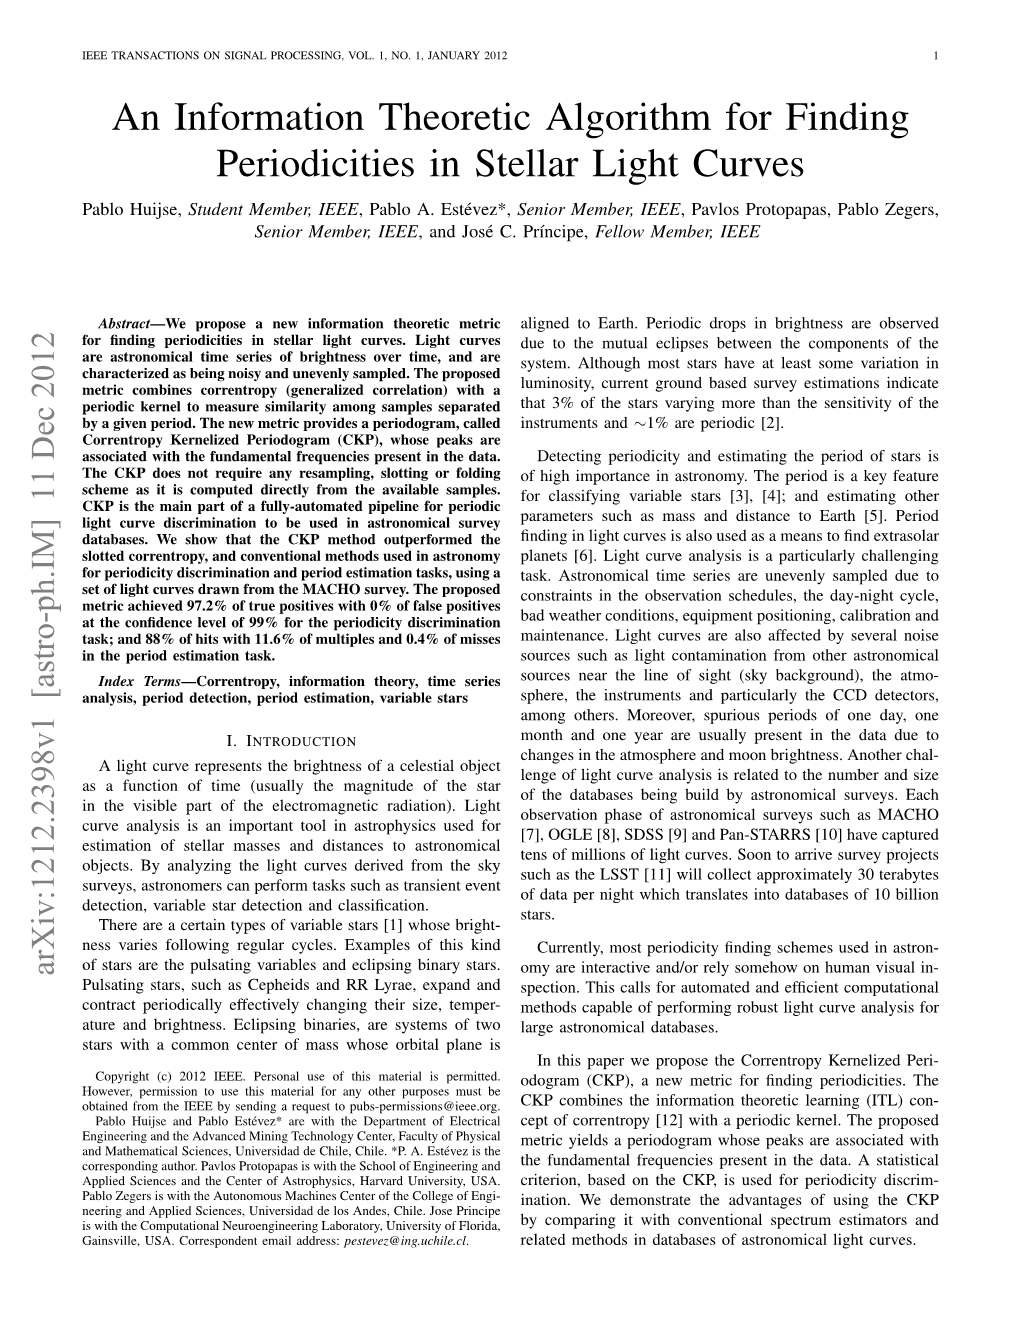 An Information Theoretic Algorithm for Finding Periodicities in Stellar Light Curves Pablo Huijse, Student Member, IEEE, Pablo A